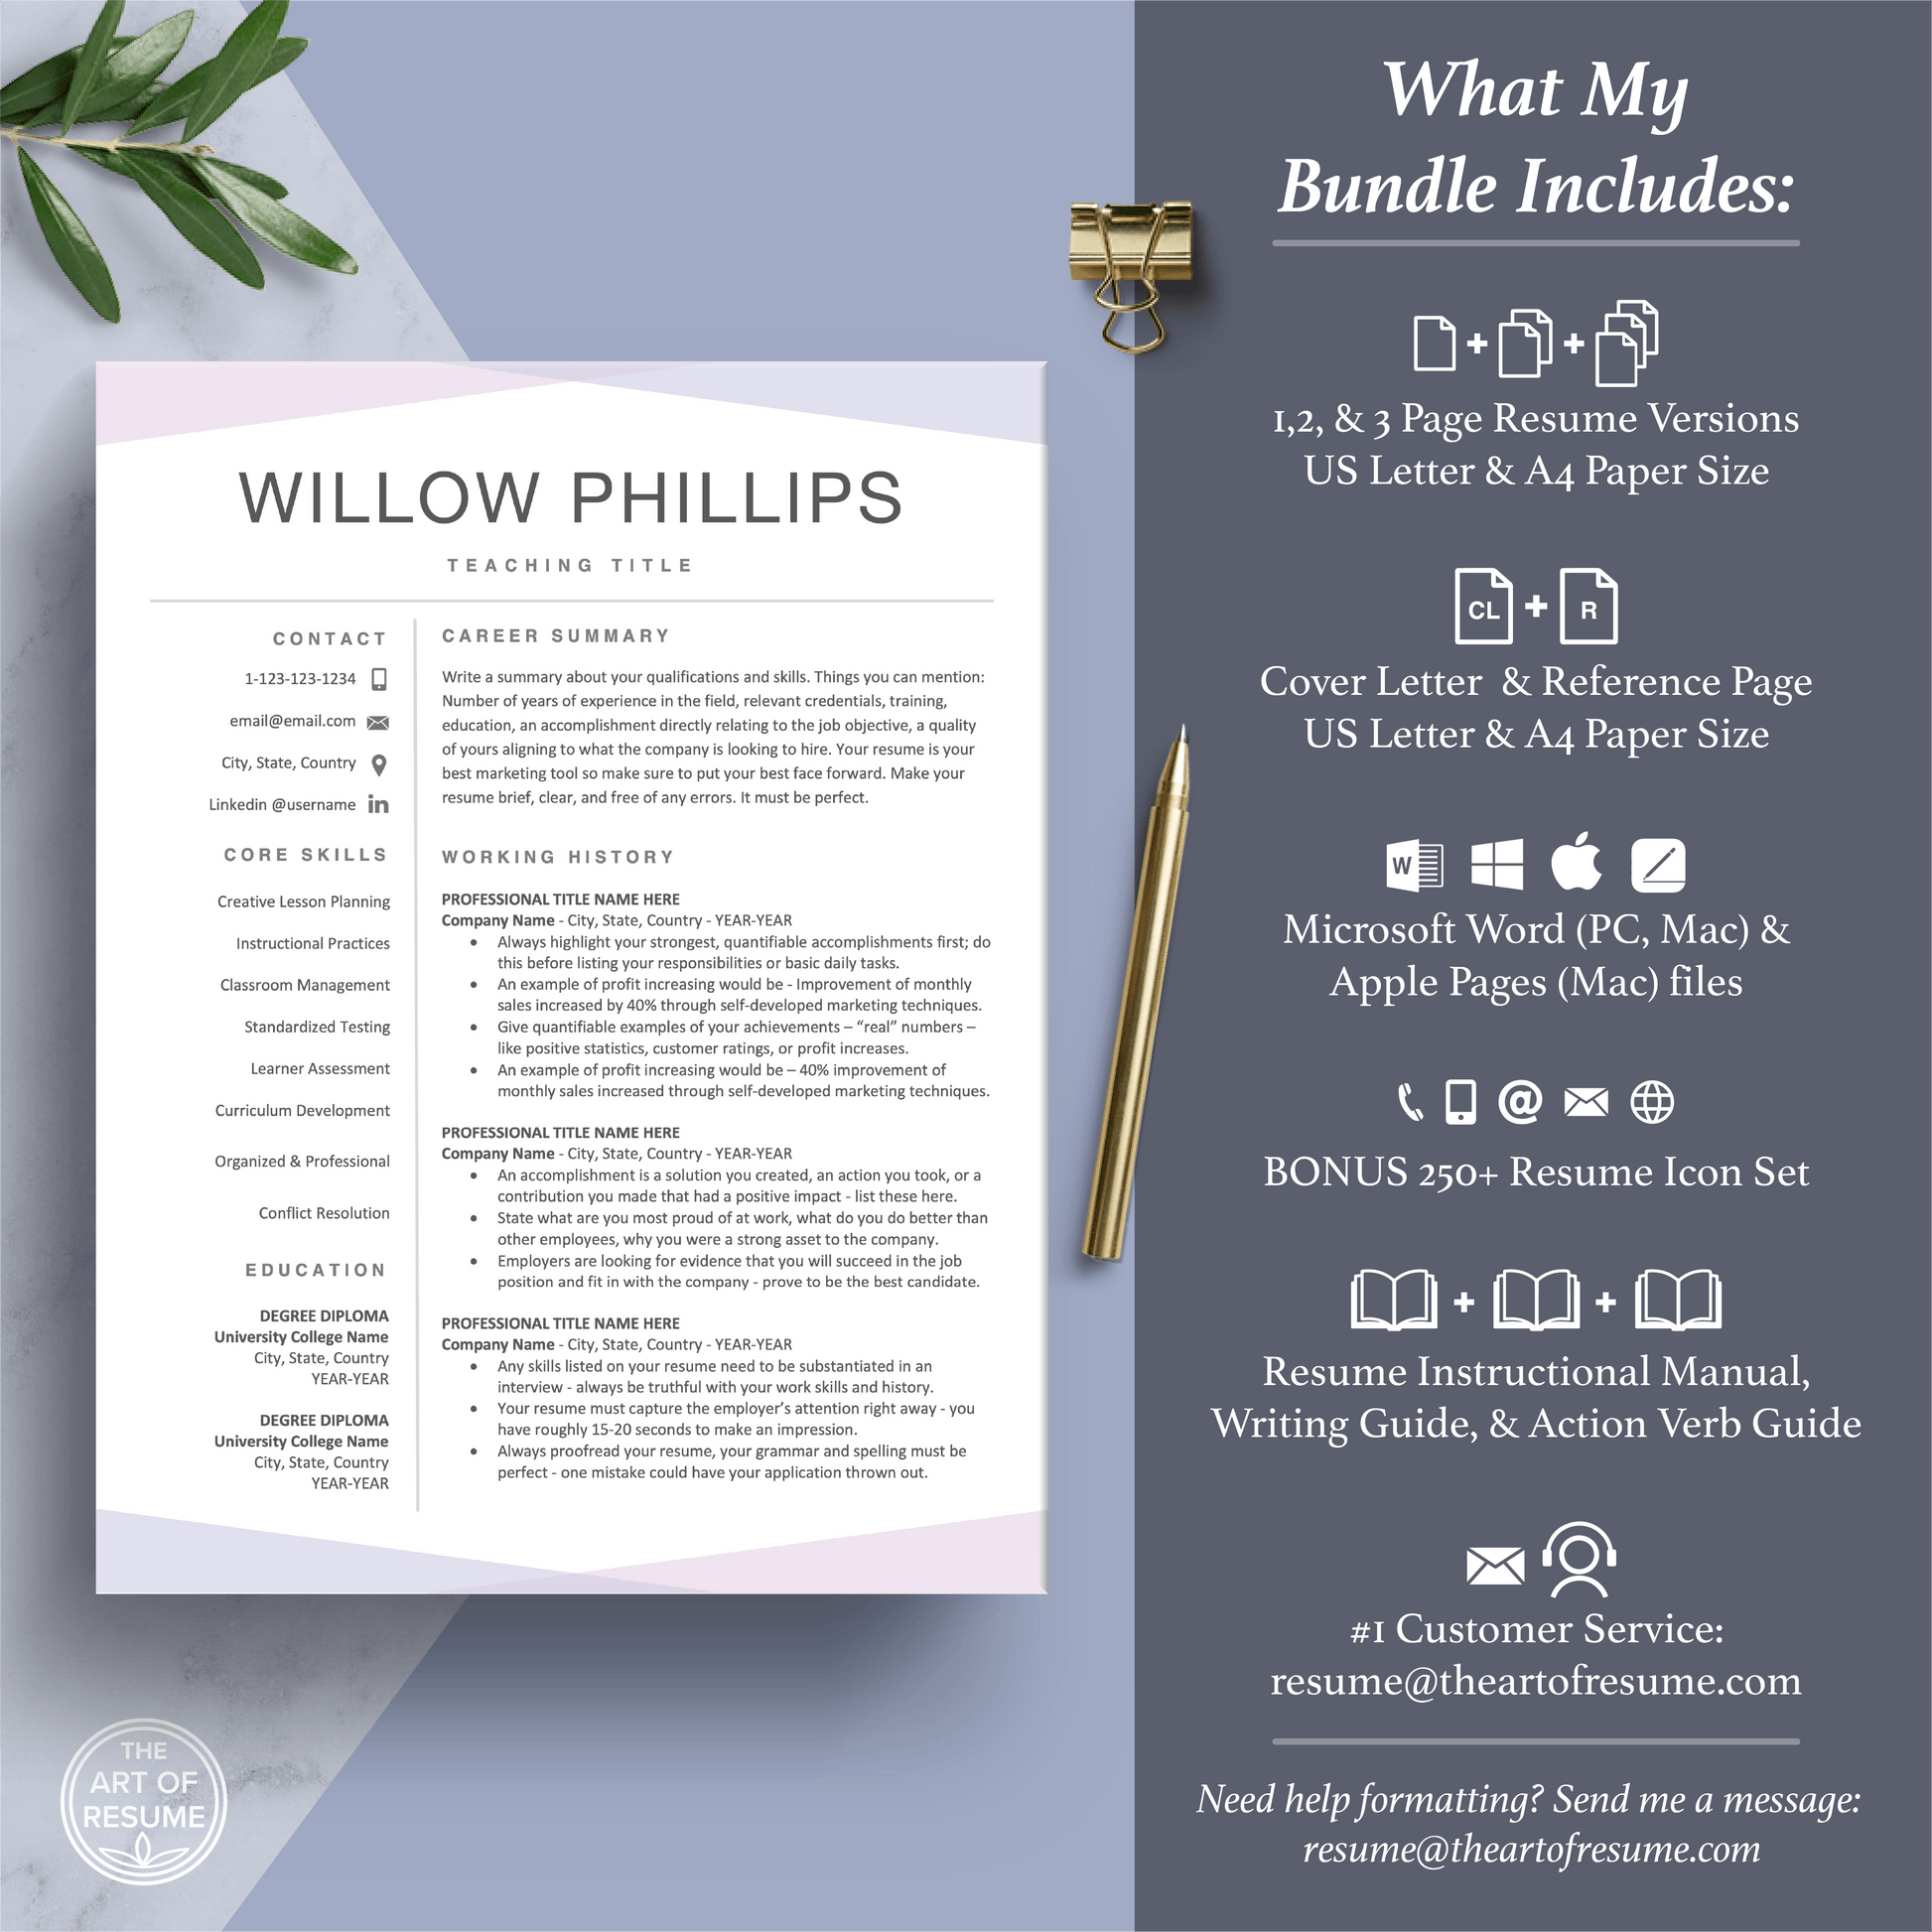 Resume Template Maker | Fully Editable Resume Template | Executive CV Download - The Art of Resume